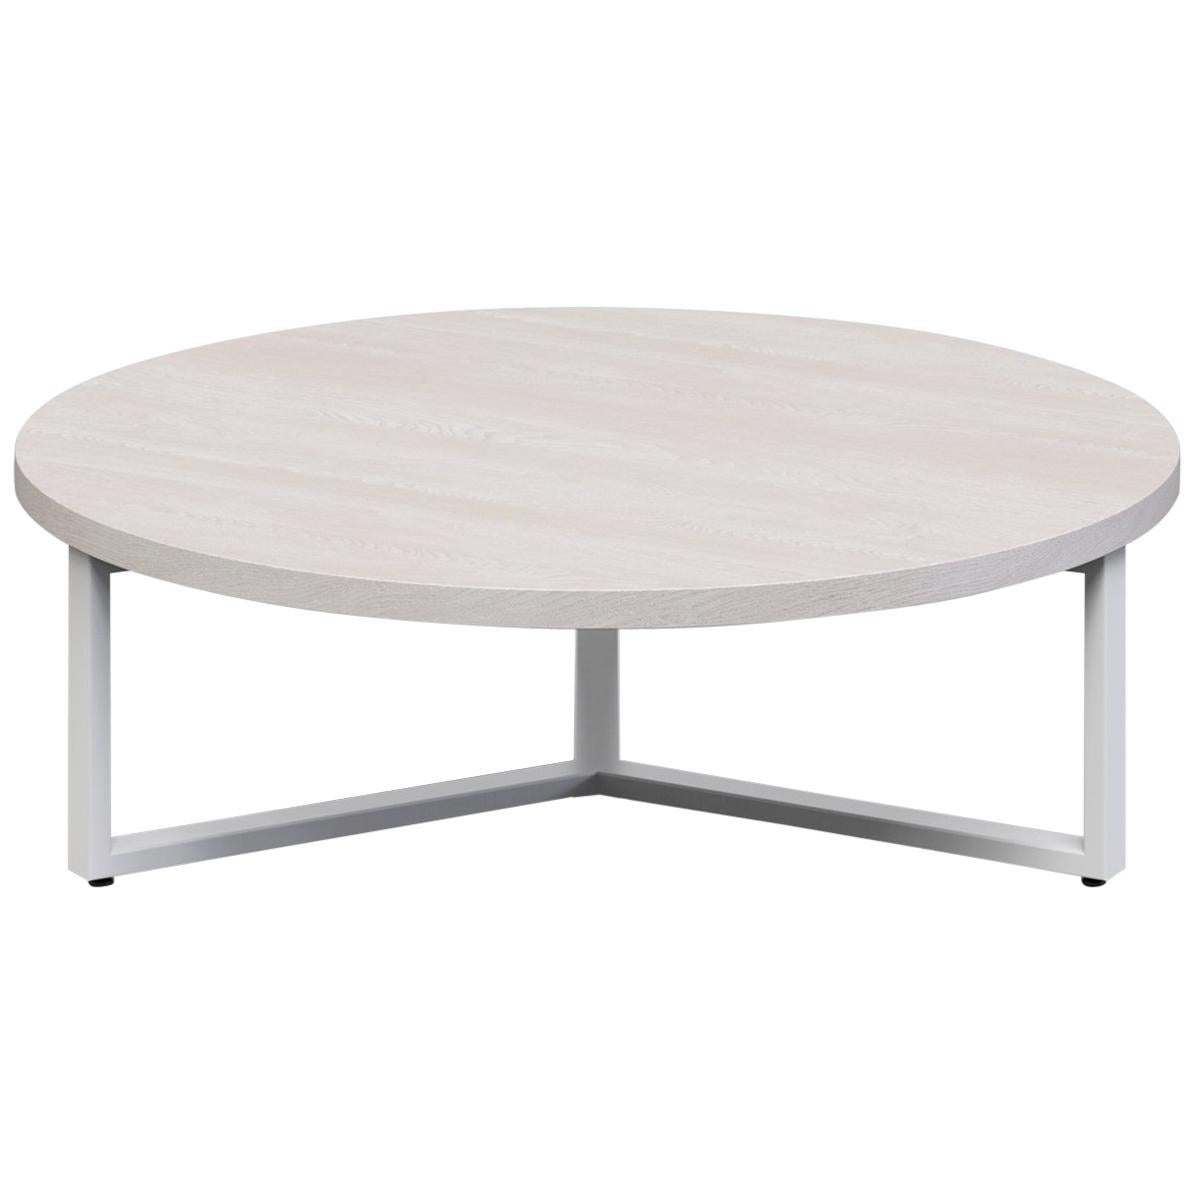 Anchor Coffee Table, White Washed Ash - IN STOCK